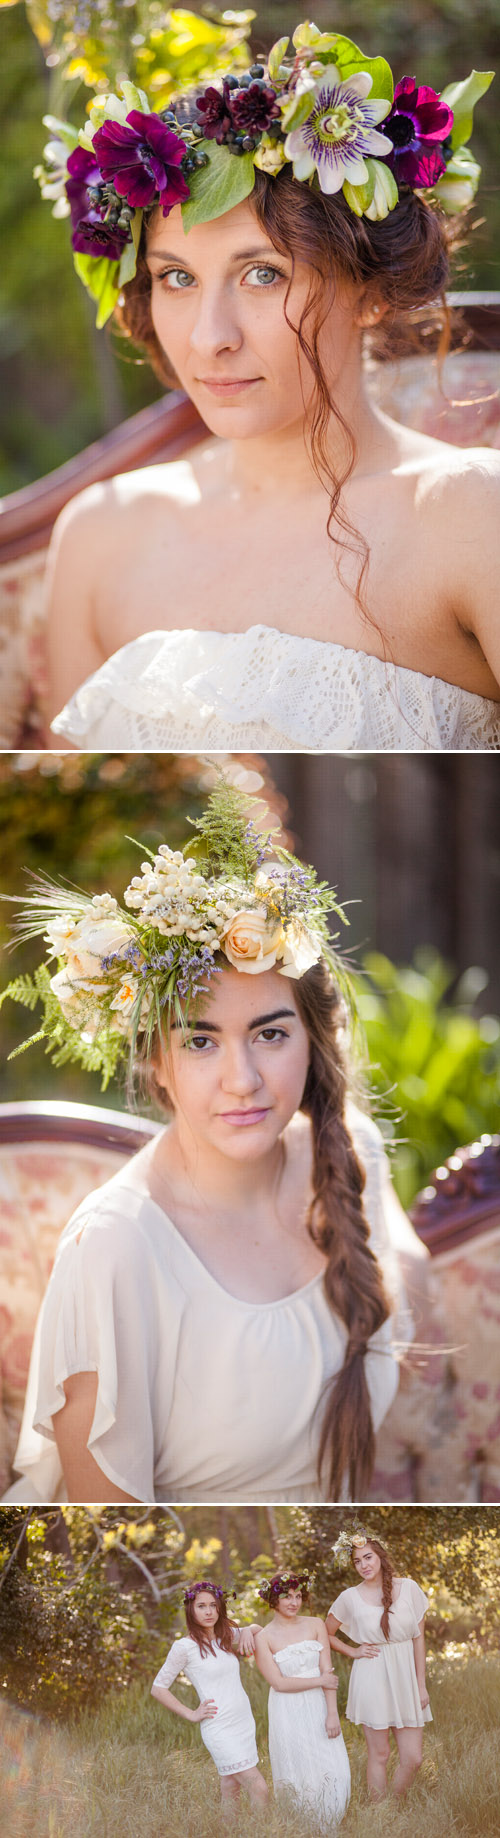 Floral head wreaths by Twigss Floral Studio - Photos by Danielle Capito Photography via Junebug Weddings